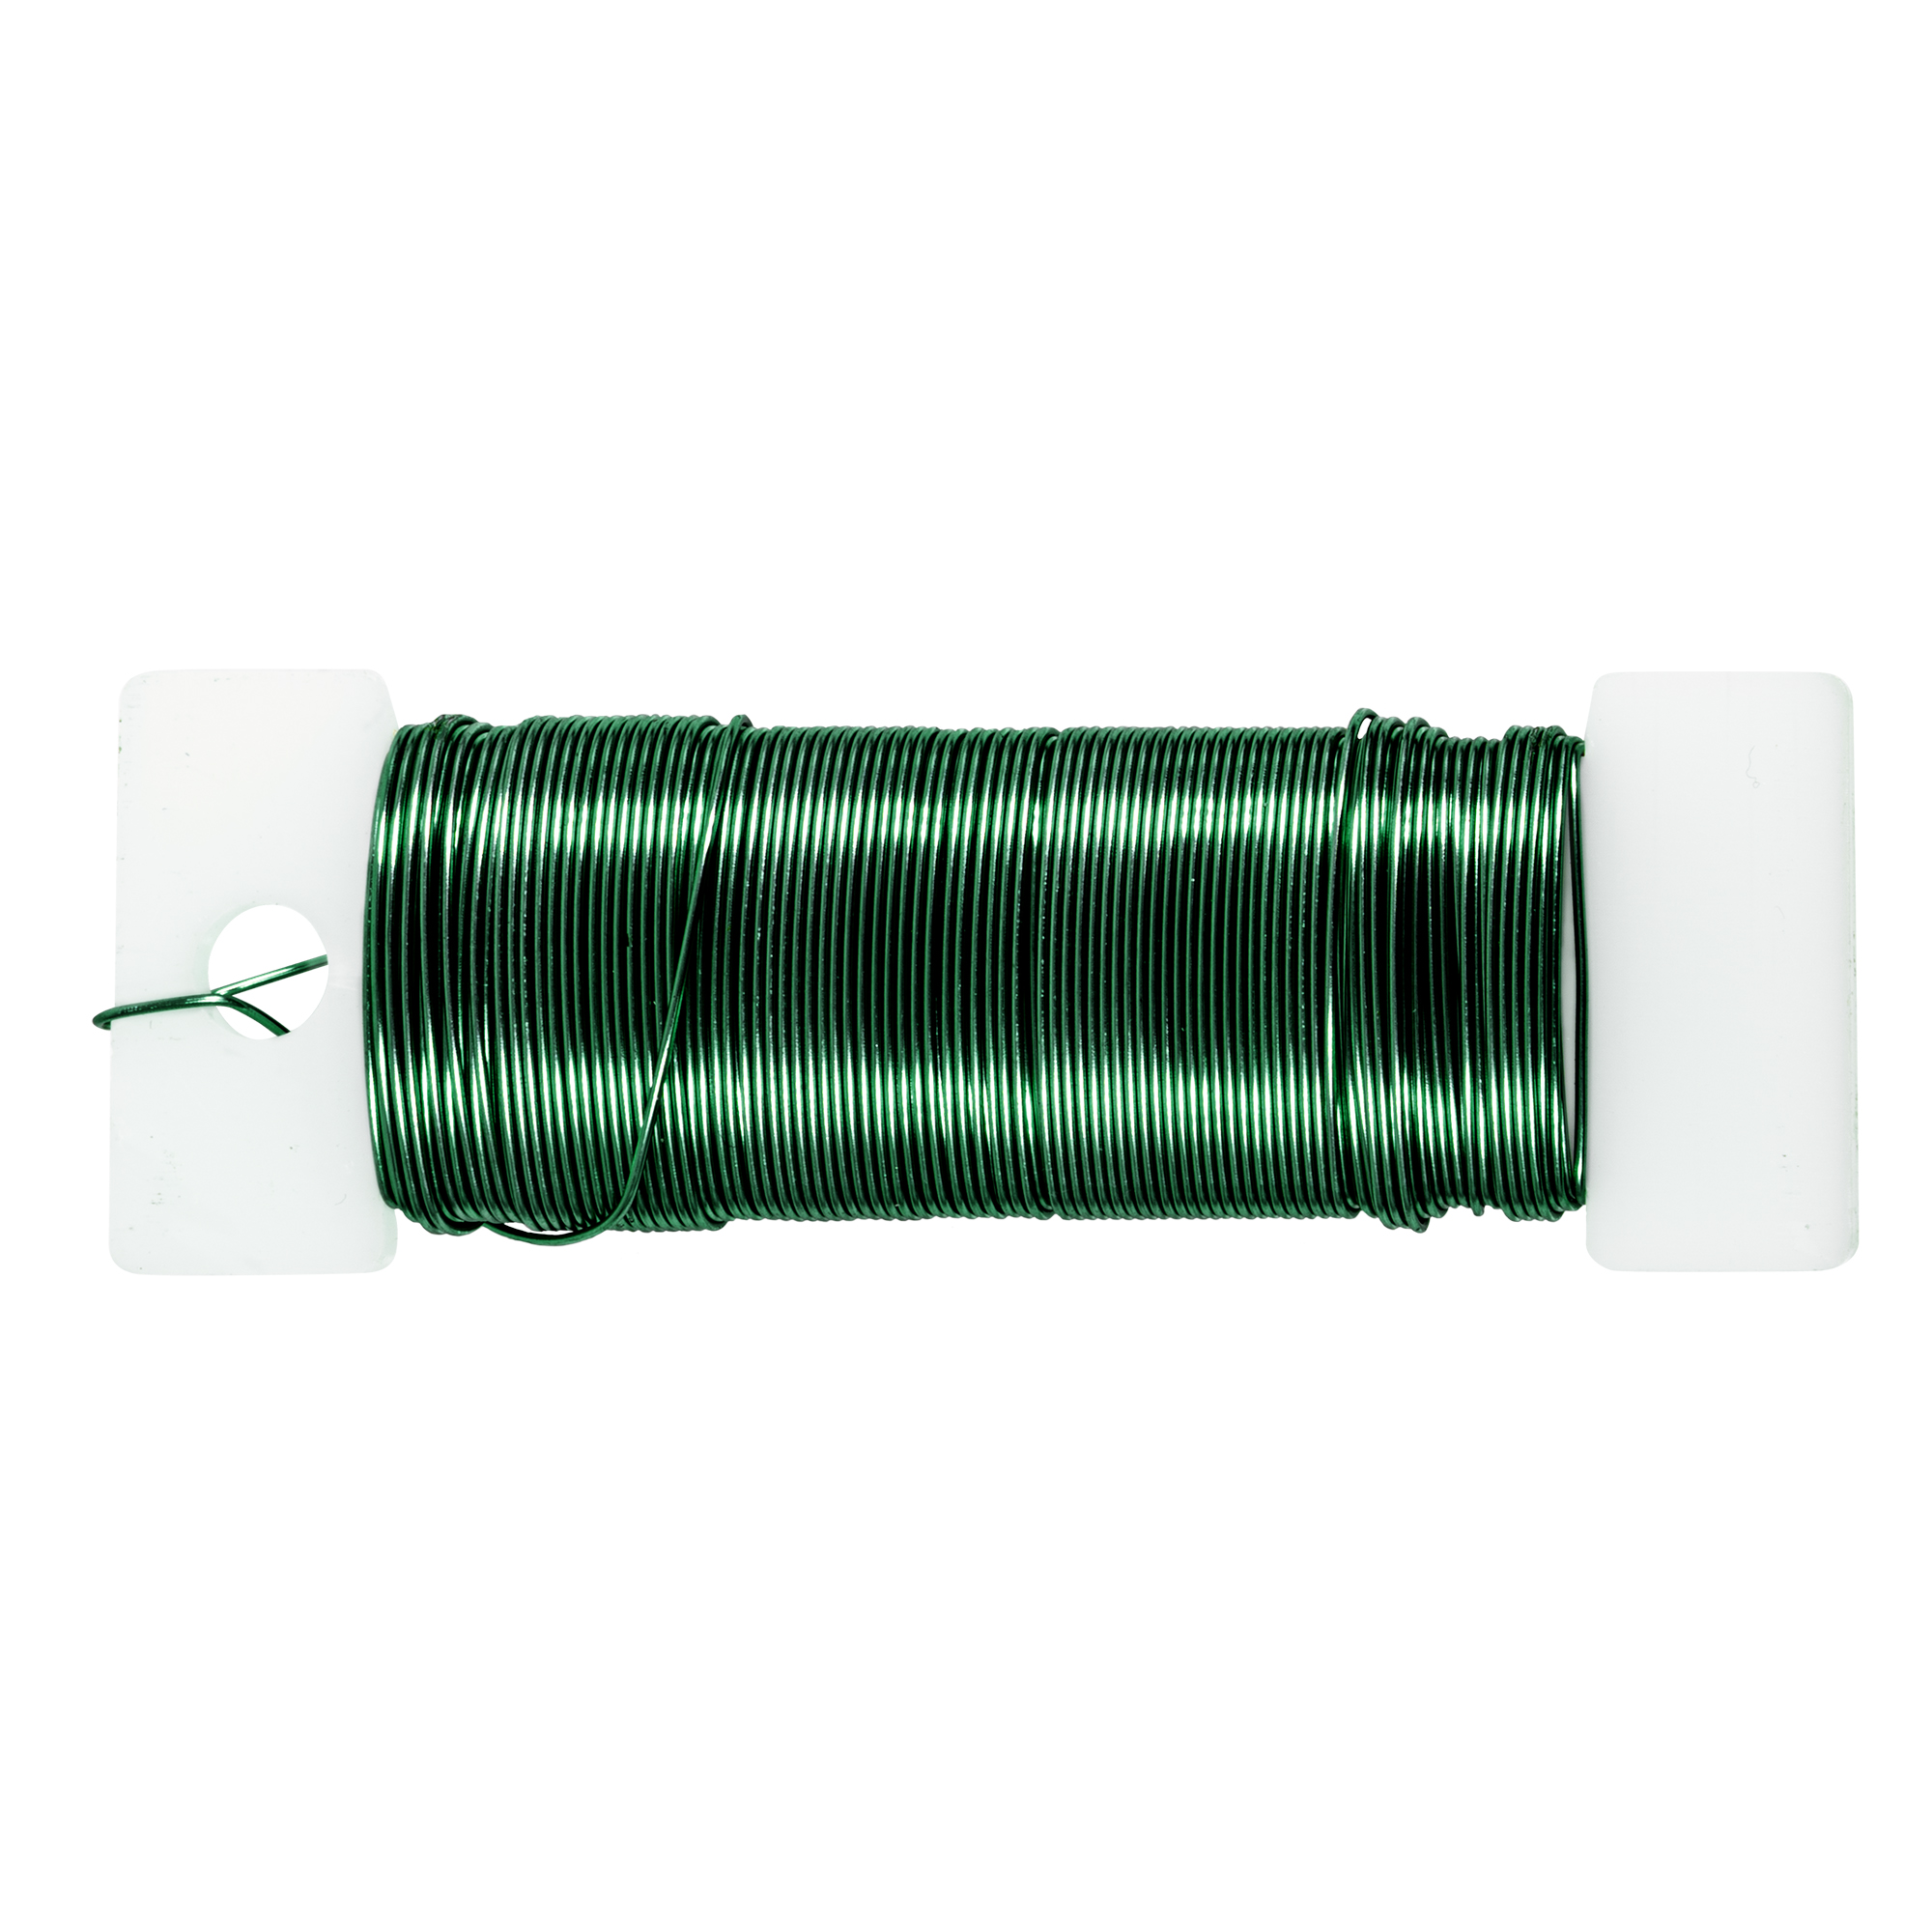 26 Gauge Floral Wire 115ft/Roll - Green